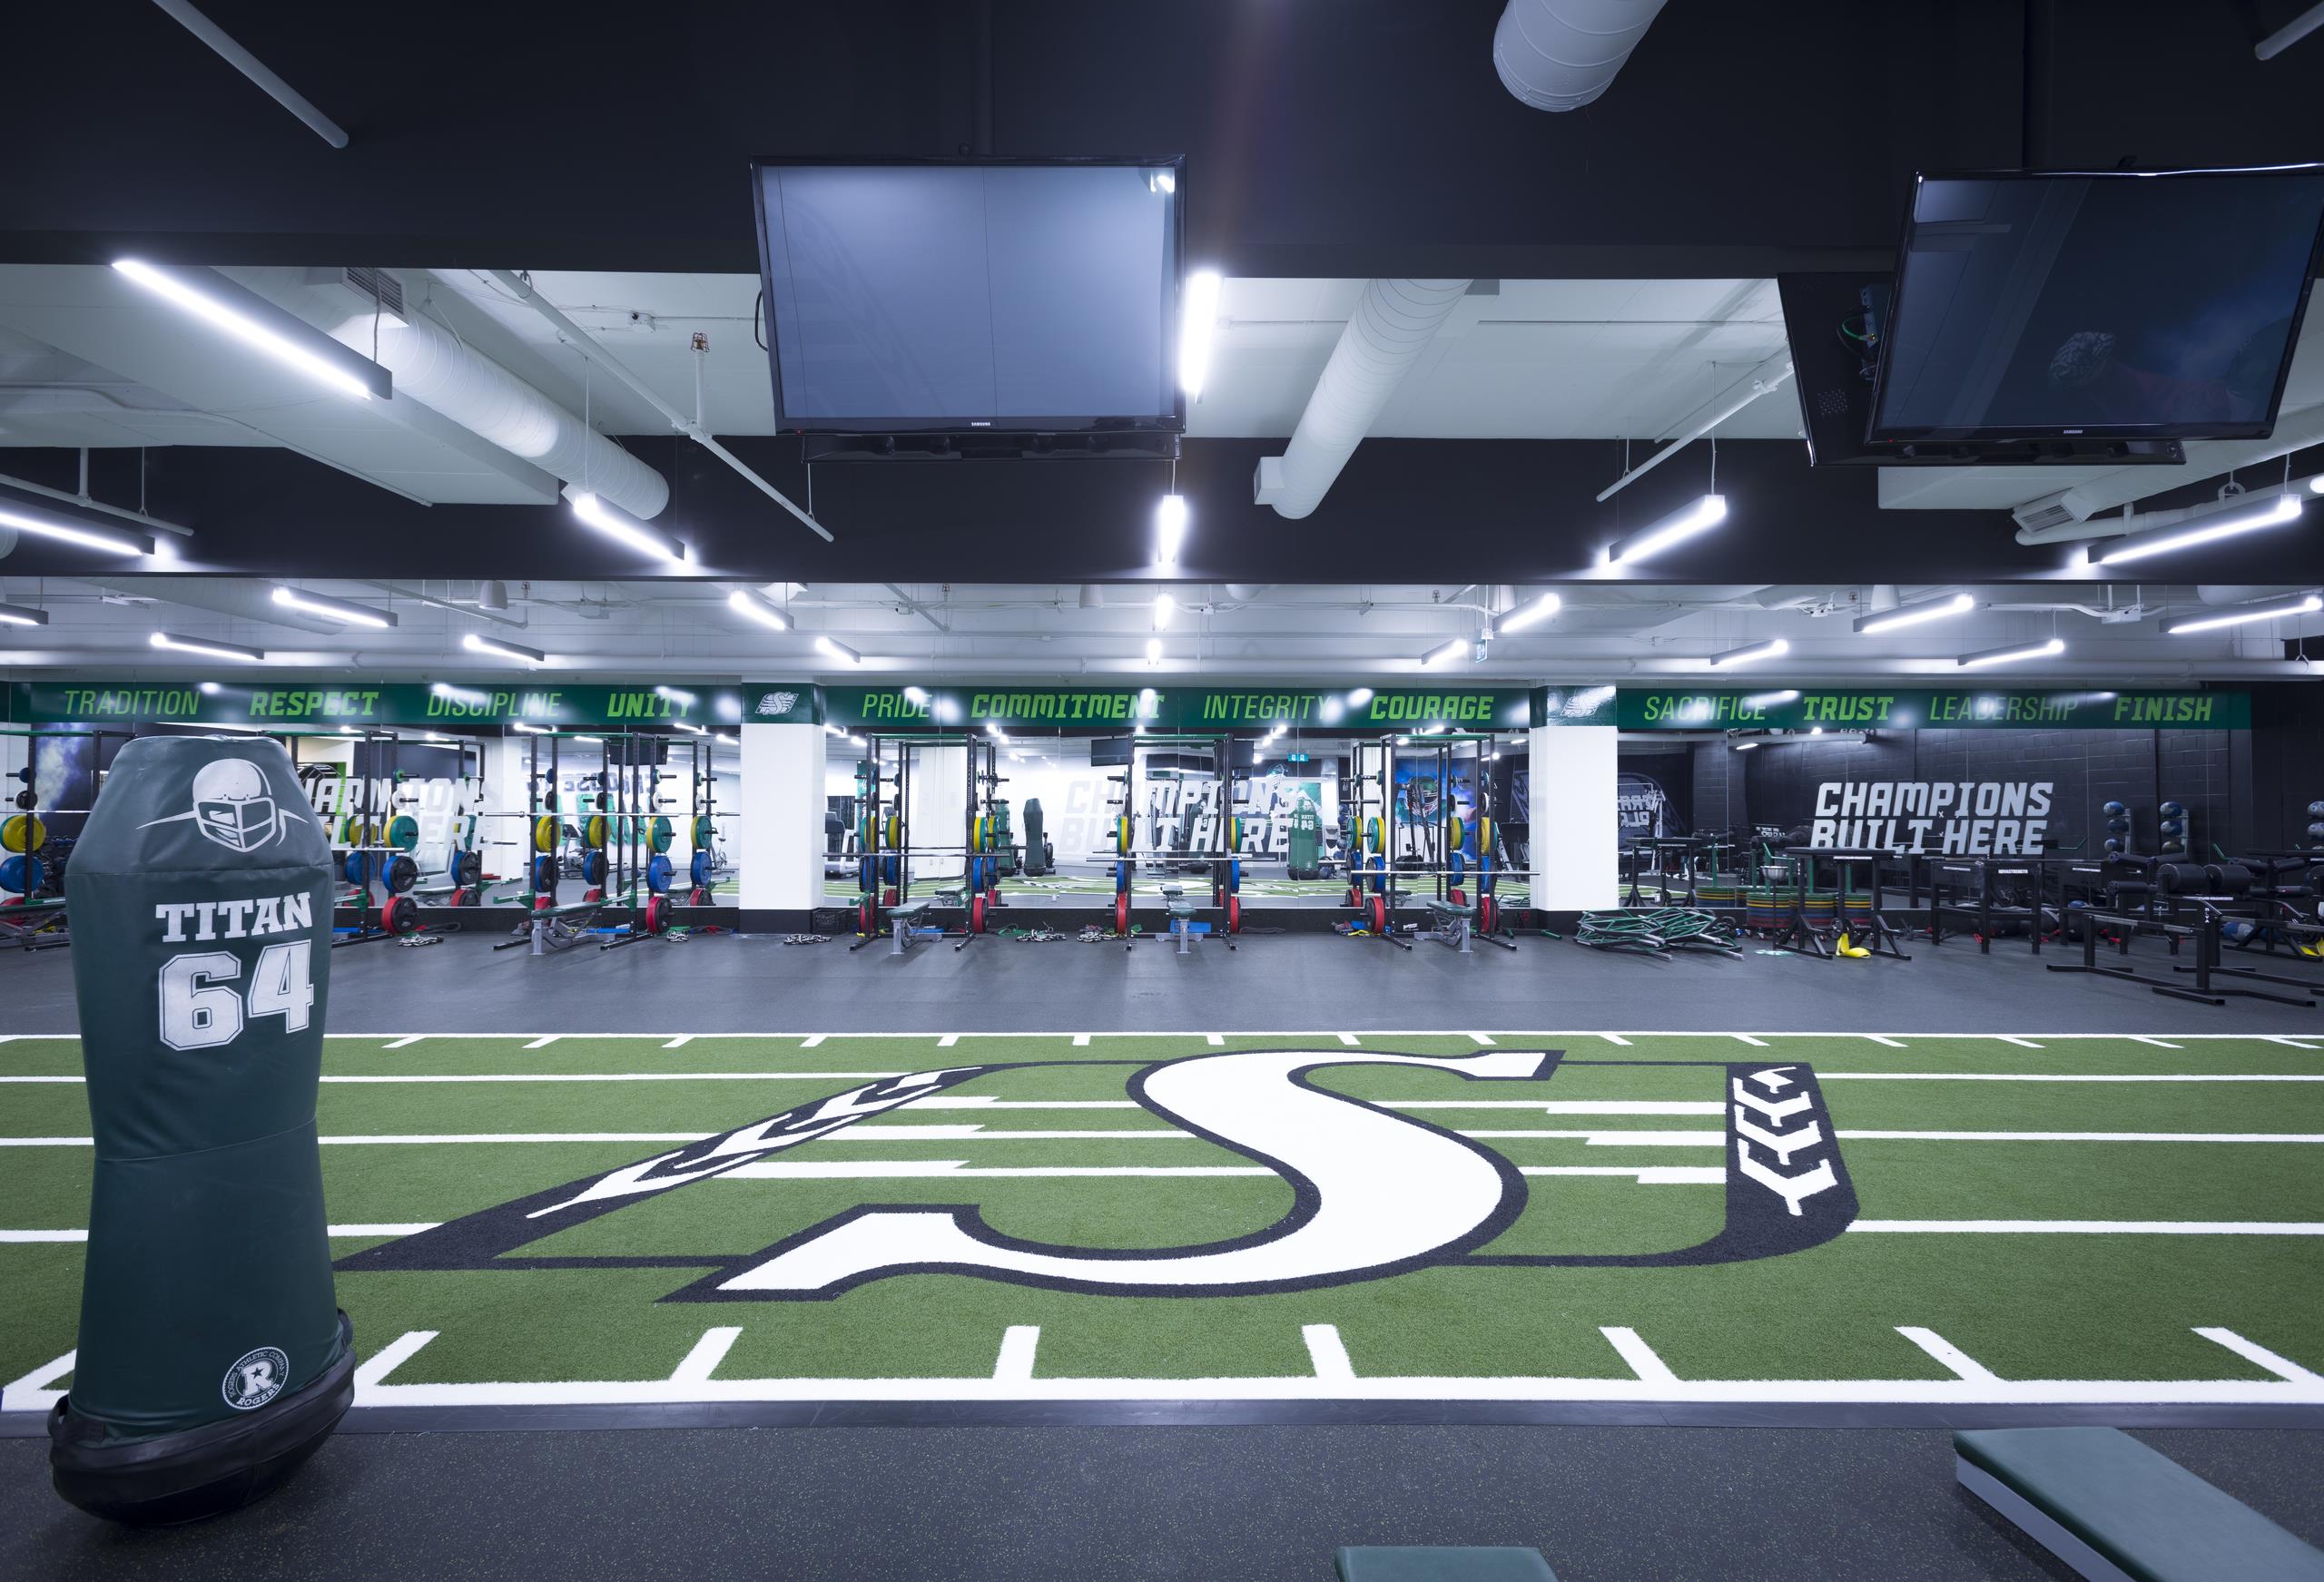 Shot of the interior of the gym